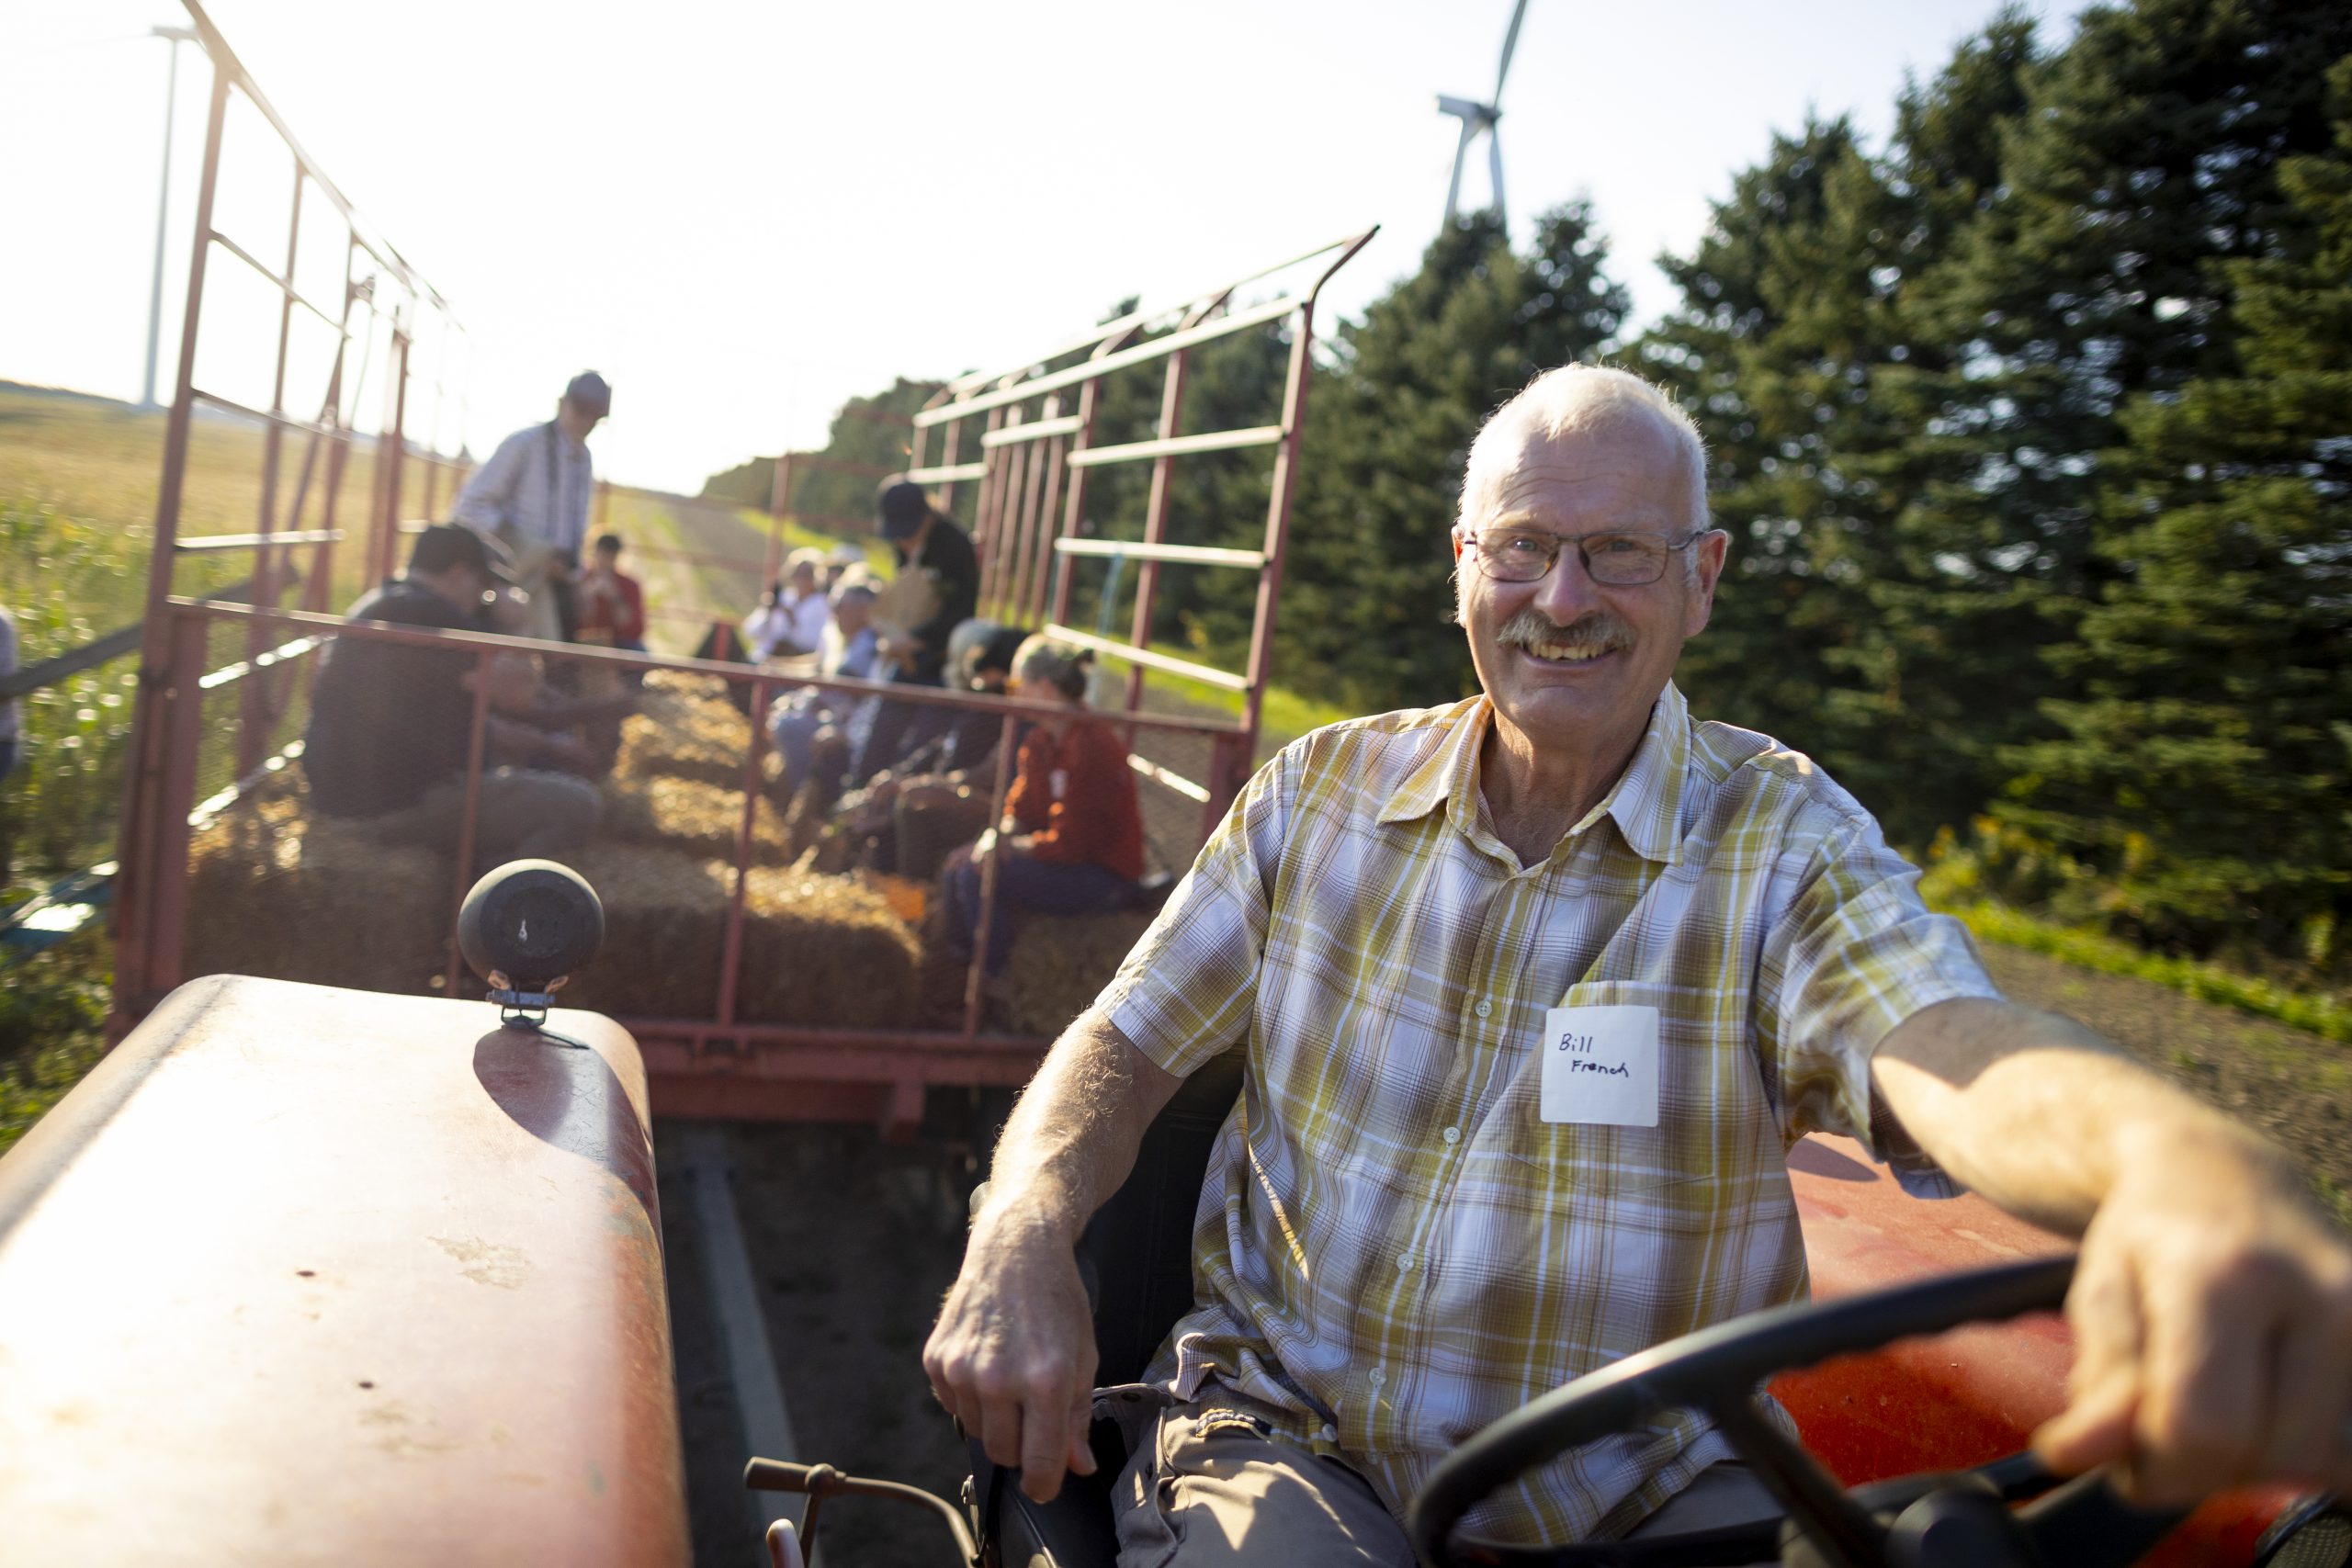 Older man driving a tractor with a trailer full of people